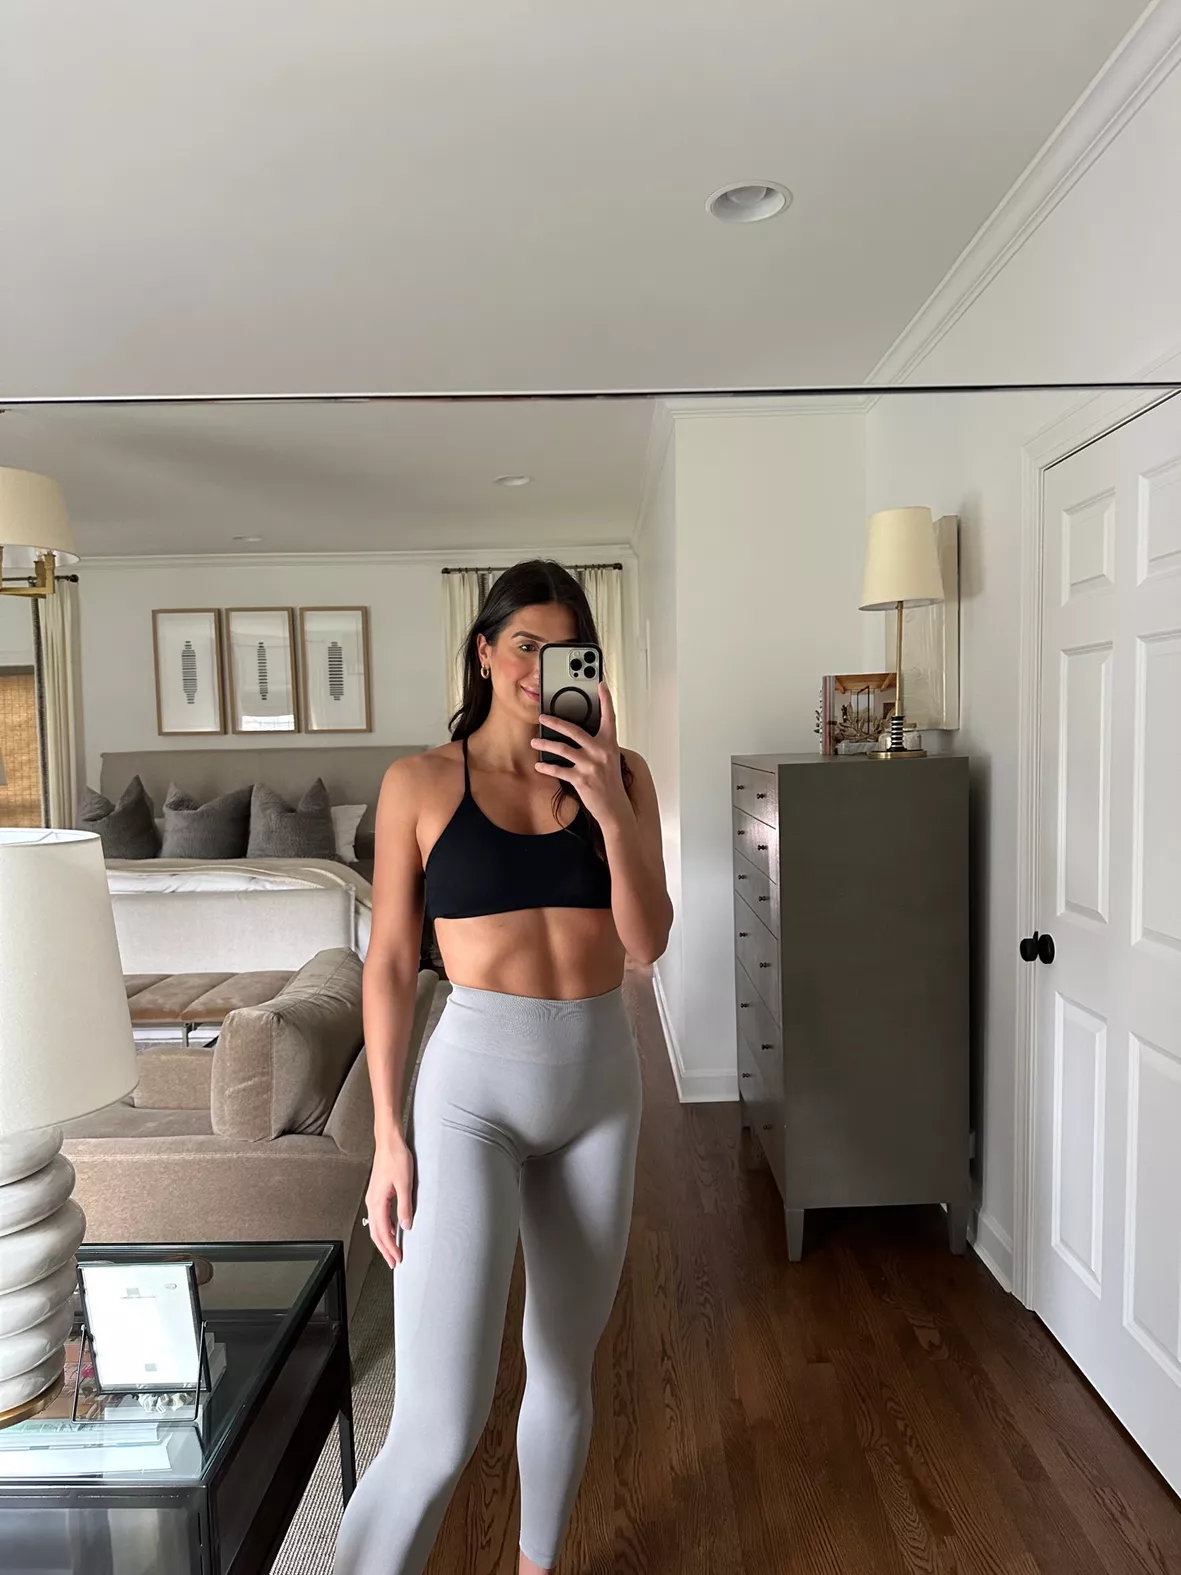 Find Out Where To Get The Pants  Summer workout outfits, Fitness